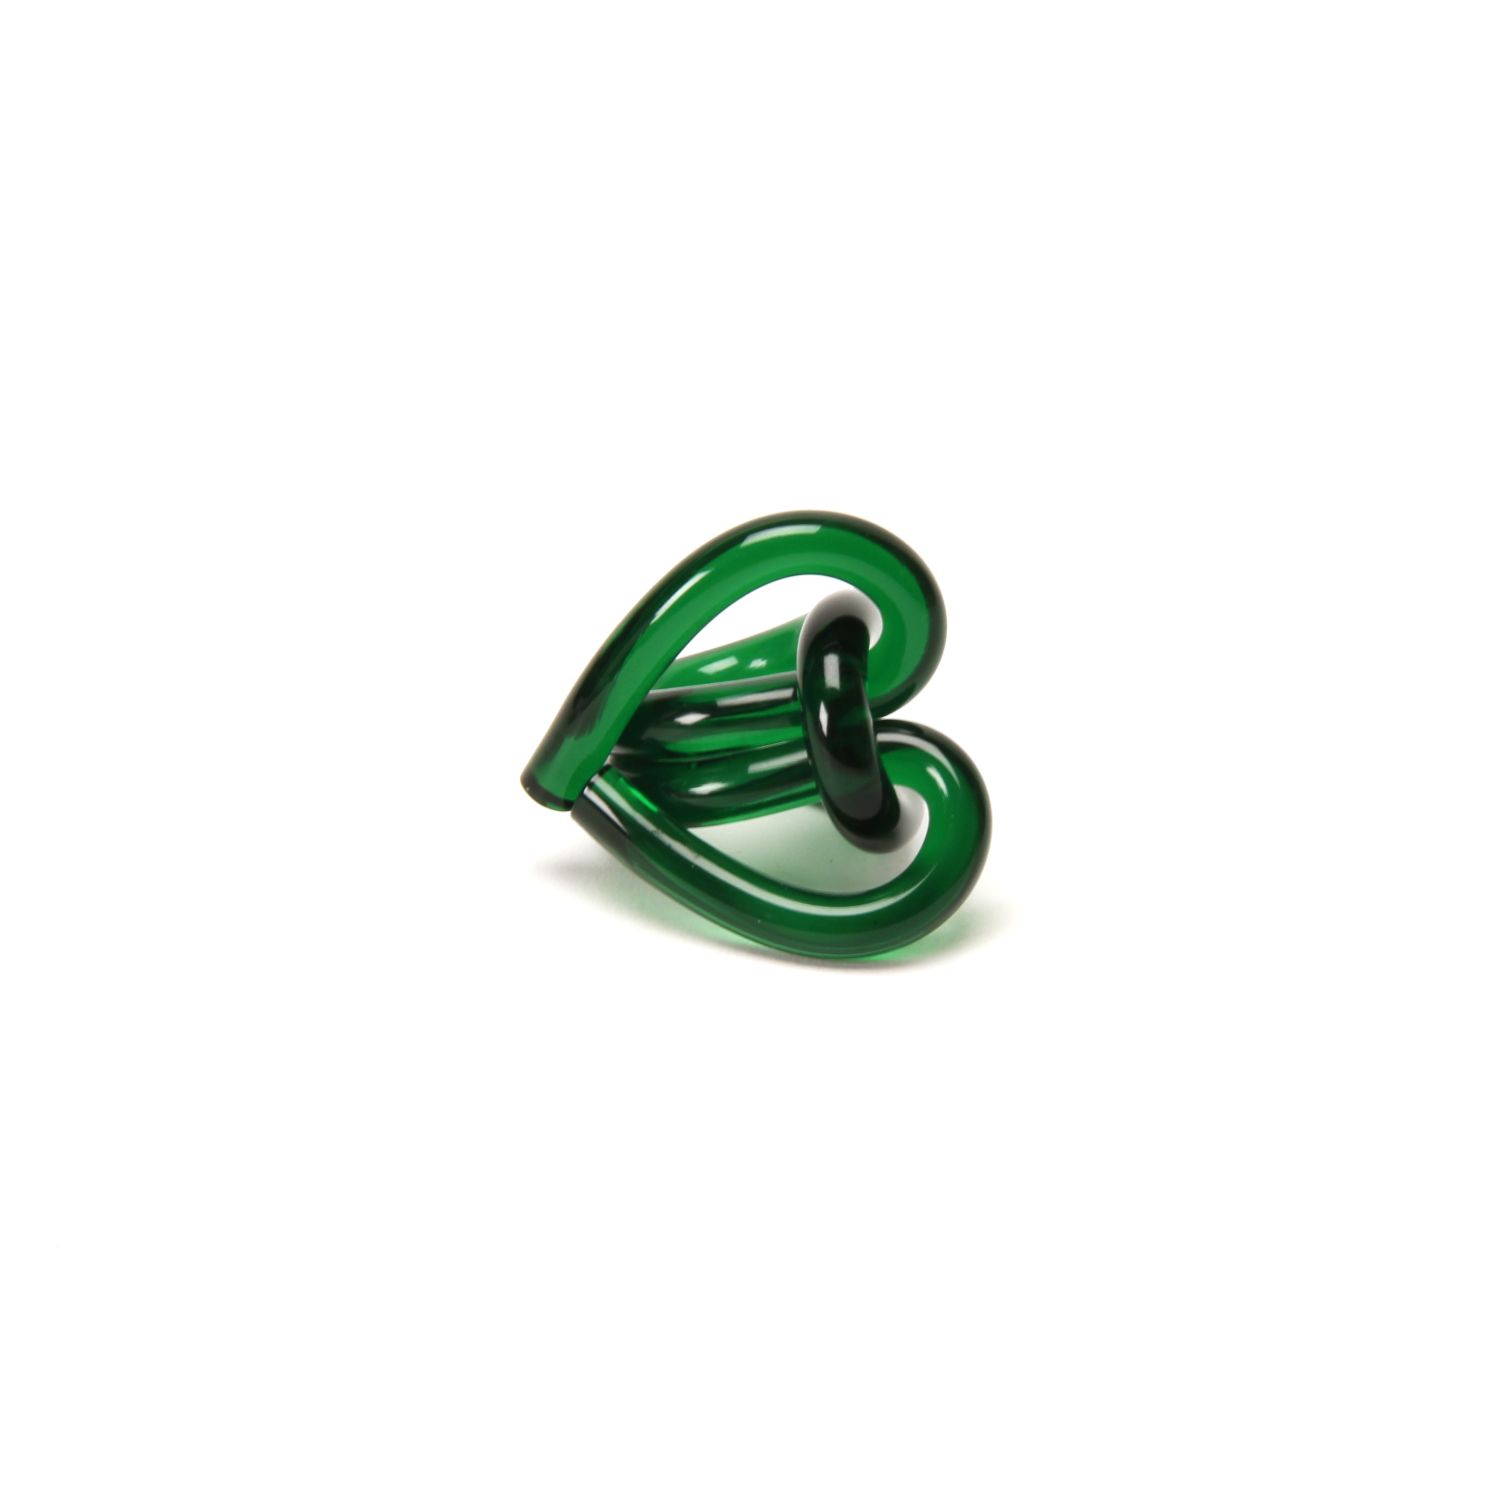 Corey Moranis: Heart Ring Green Product Image 1 of 3